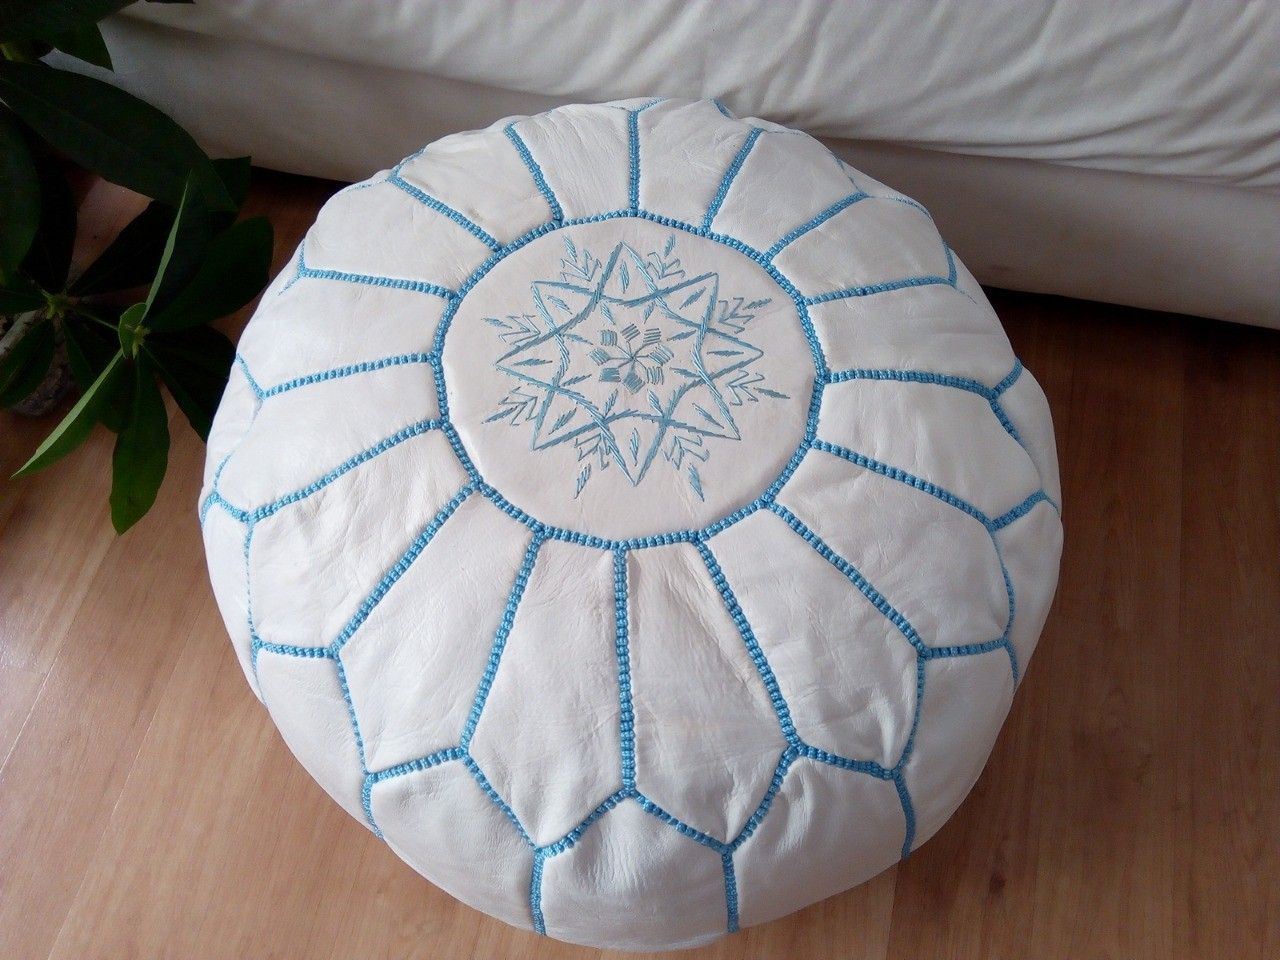 Moroccan White Pouf Light Blue Stitching – Leather Unstuffed Pouf Pertaining To Light Blue Cylinder Pouf Ottomans (View 11 of 20)